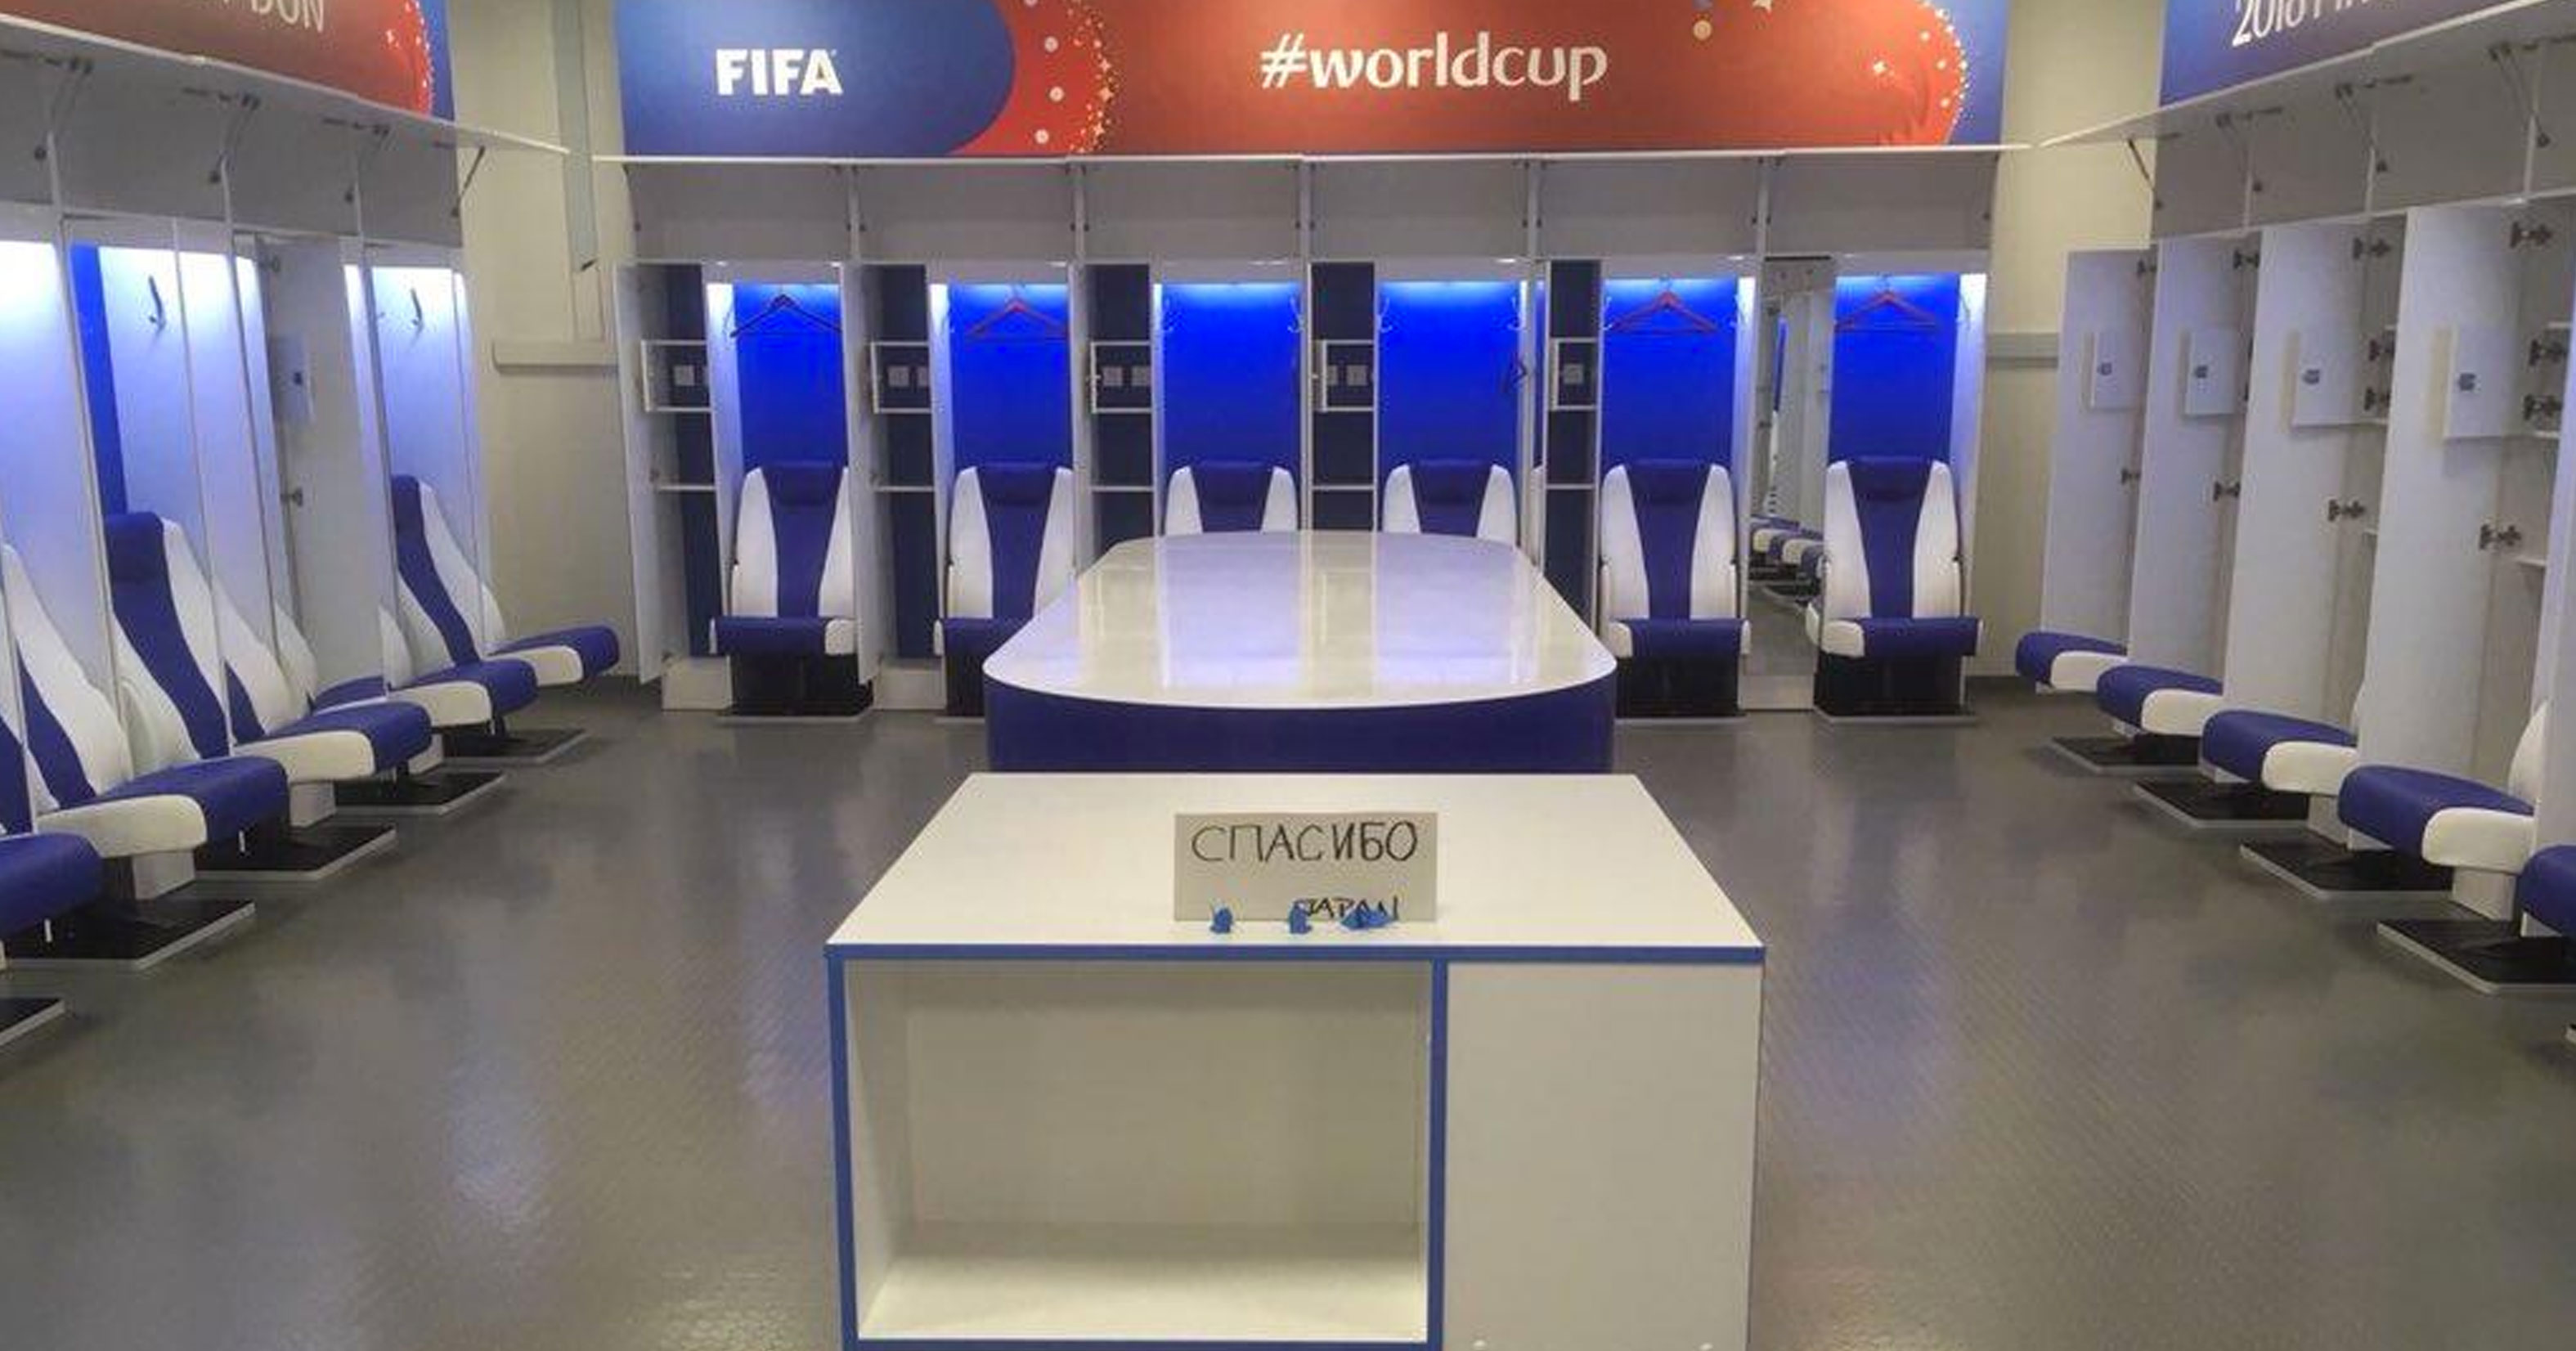 Japan Leaves Locker Room Absolutely Spotless After World Cup Elimination, Even Leaves Thank You Note